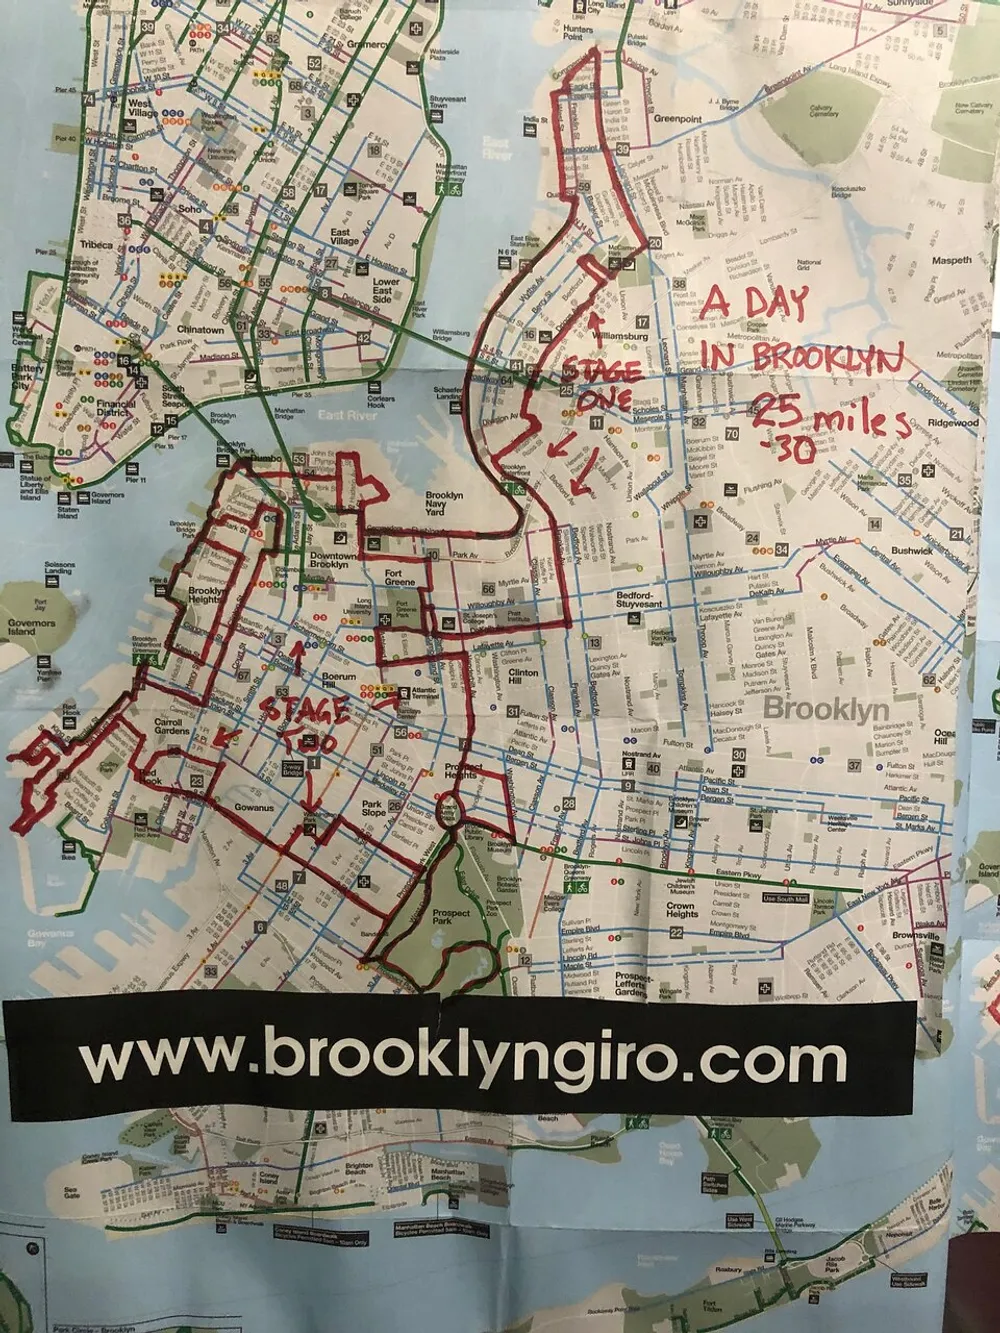 The image displays a map of a portion of New York City with a focus on Brooklyn showing annotated routes for STAGE ONE and STAGE TWO of a cycling or walking event and a title that reads A DAY IN BROOKLYN 25 miles - 30 miles along with the web address wwwbrooklyngirocom